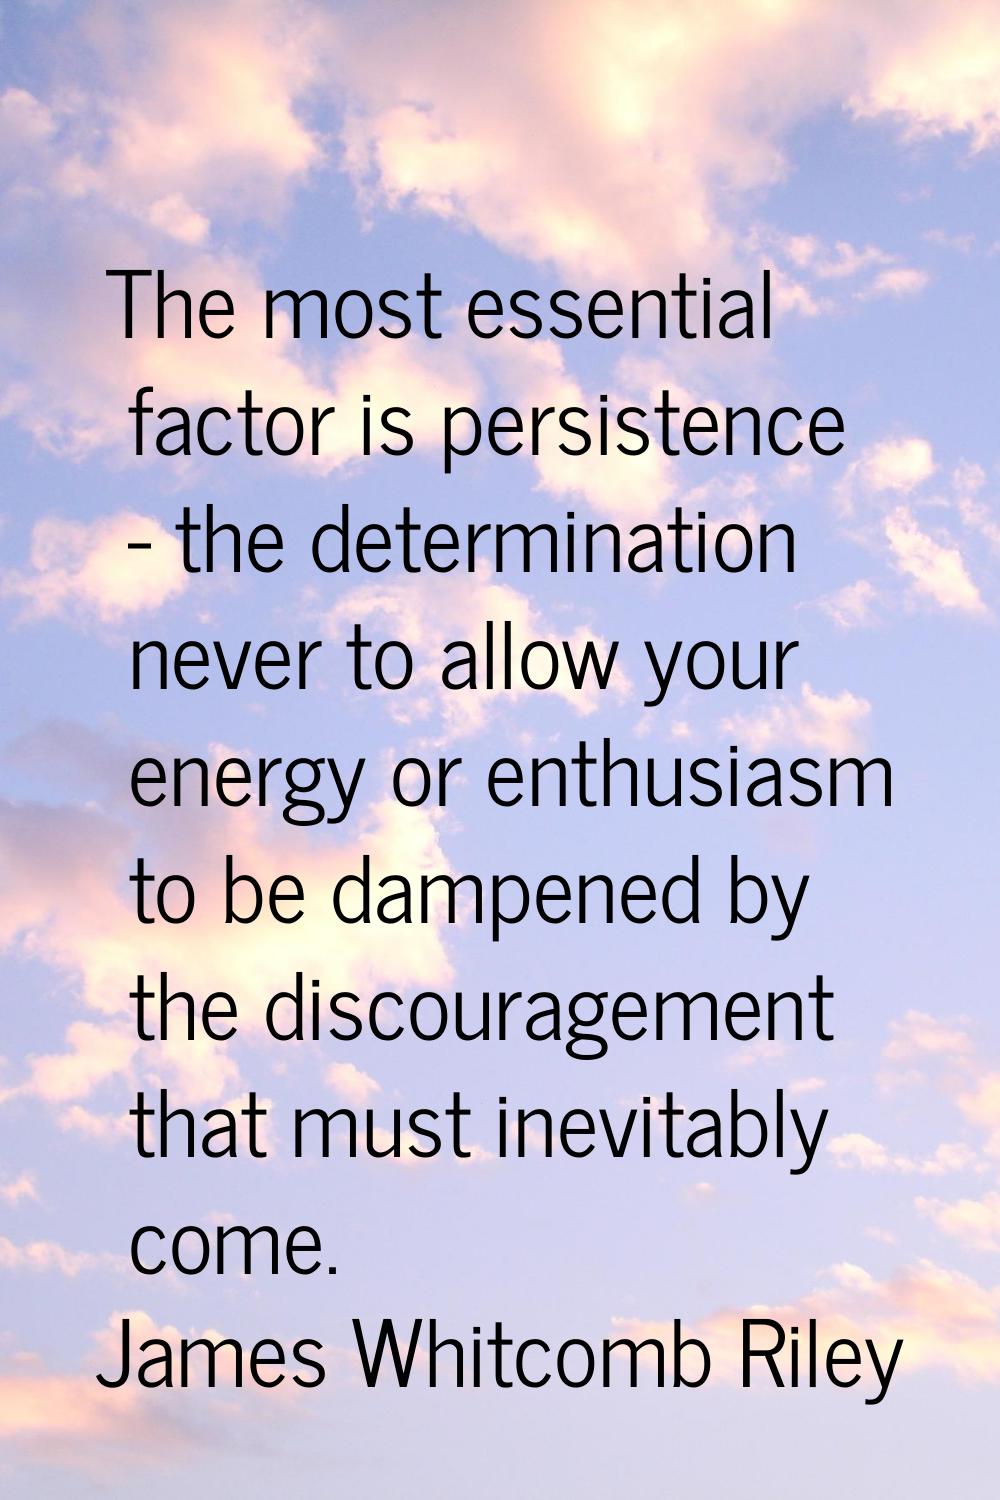 The most essential factor is persistence - the determination never to allow your energy or enthusia